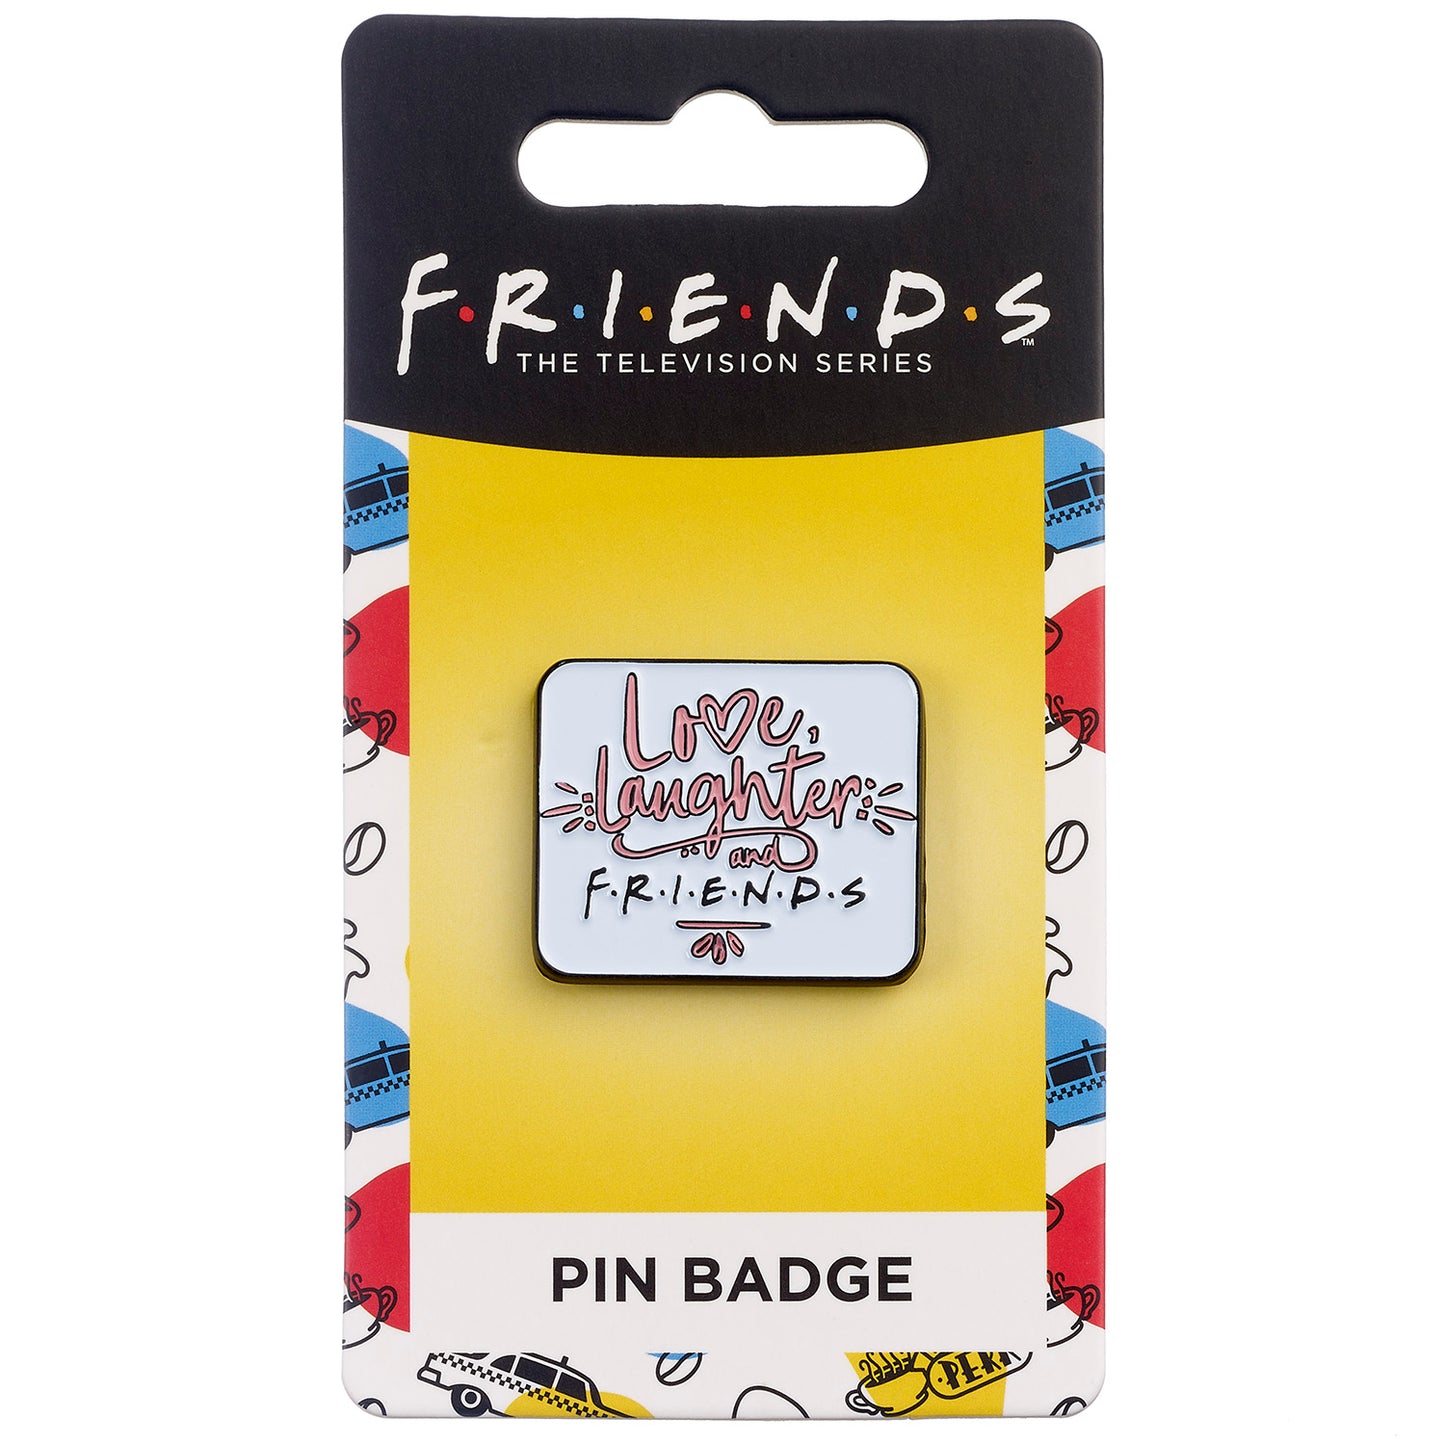 Friends the TV Series Love, Laughter and Friends Pin Badge - White